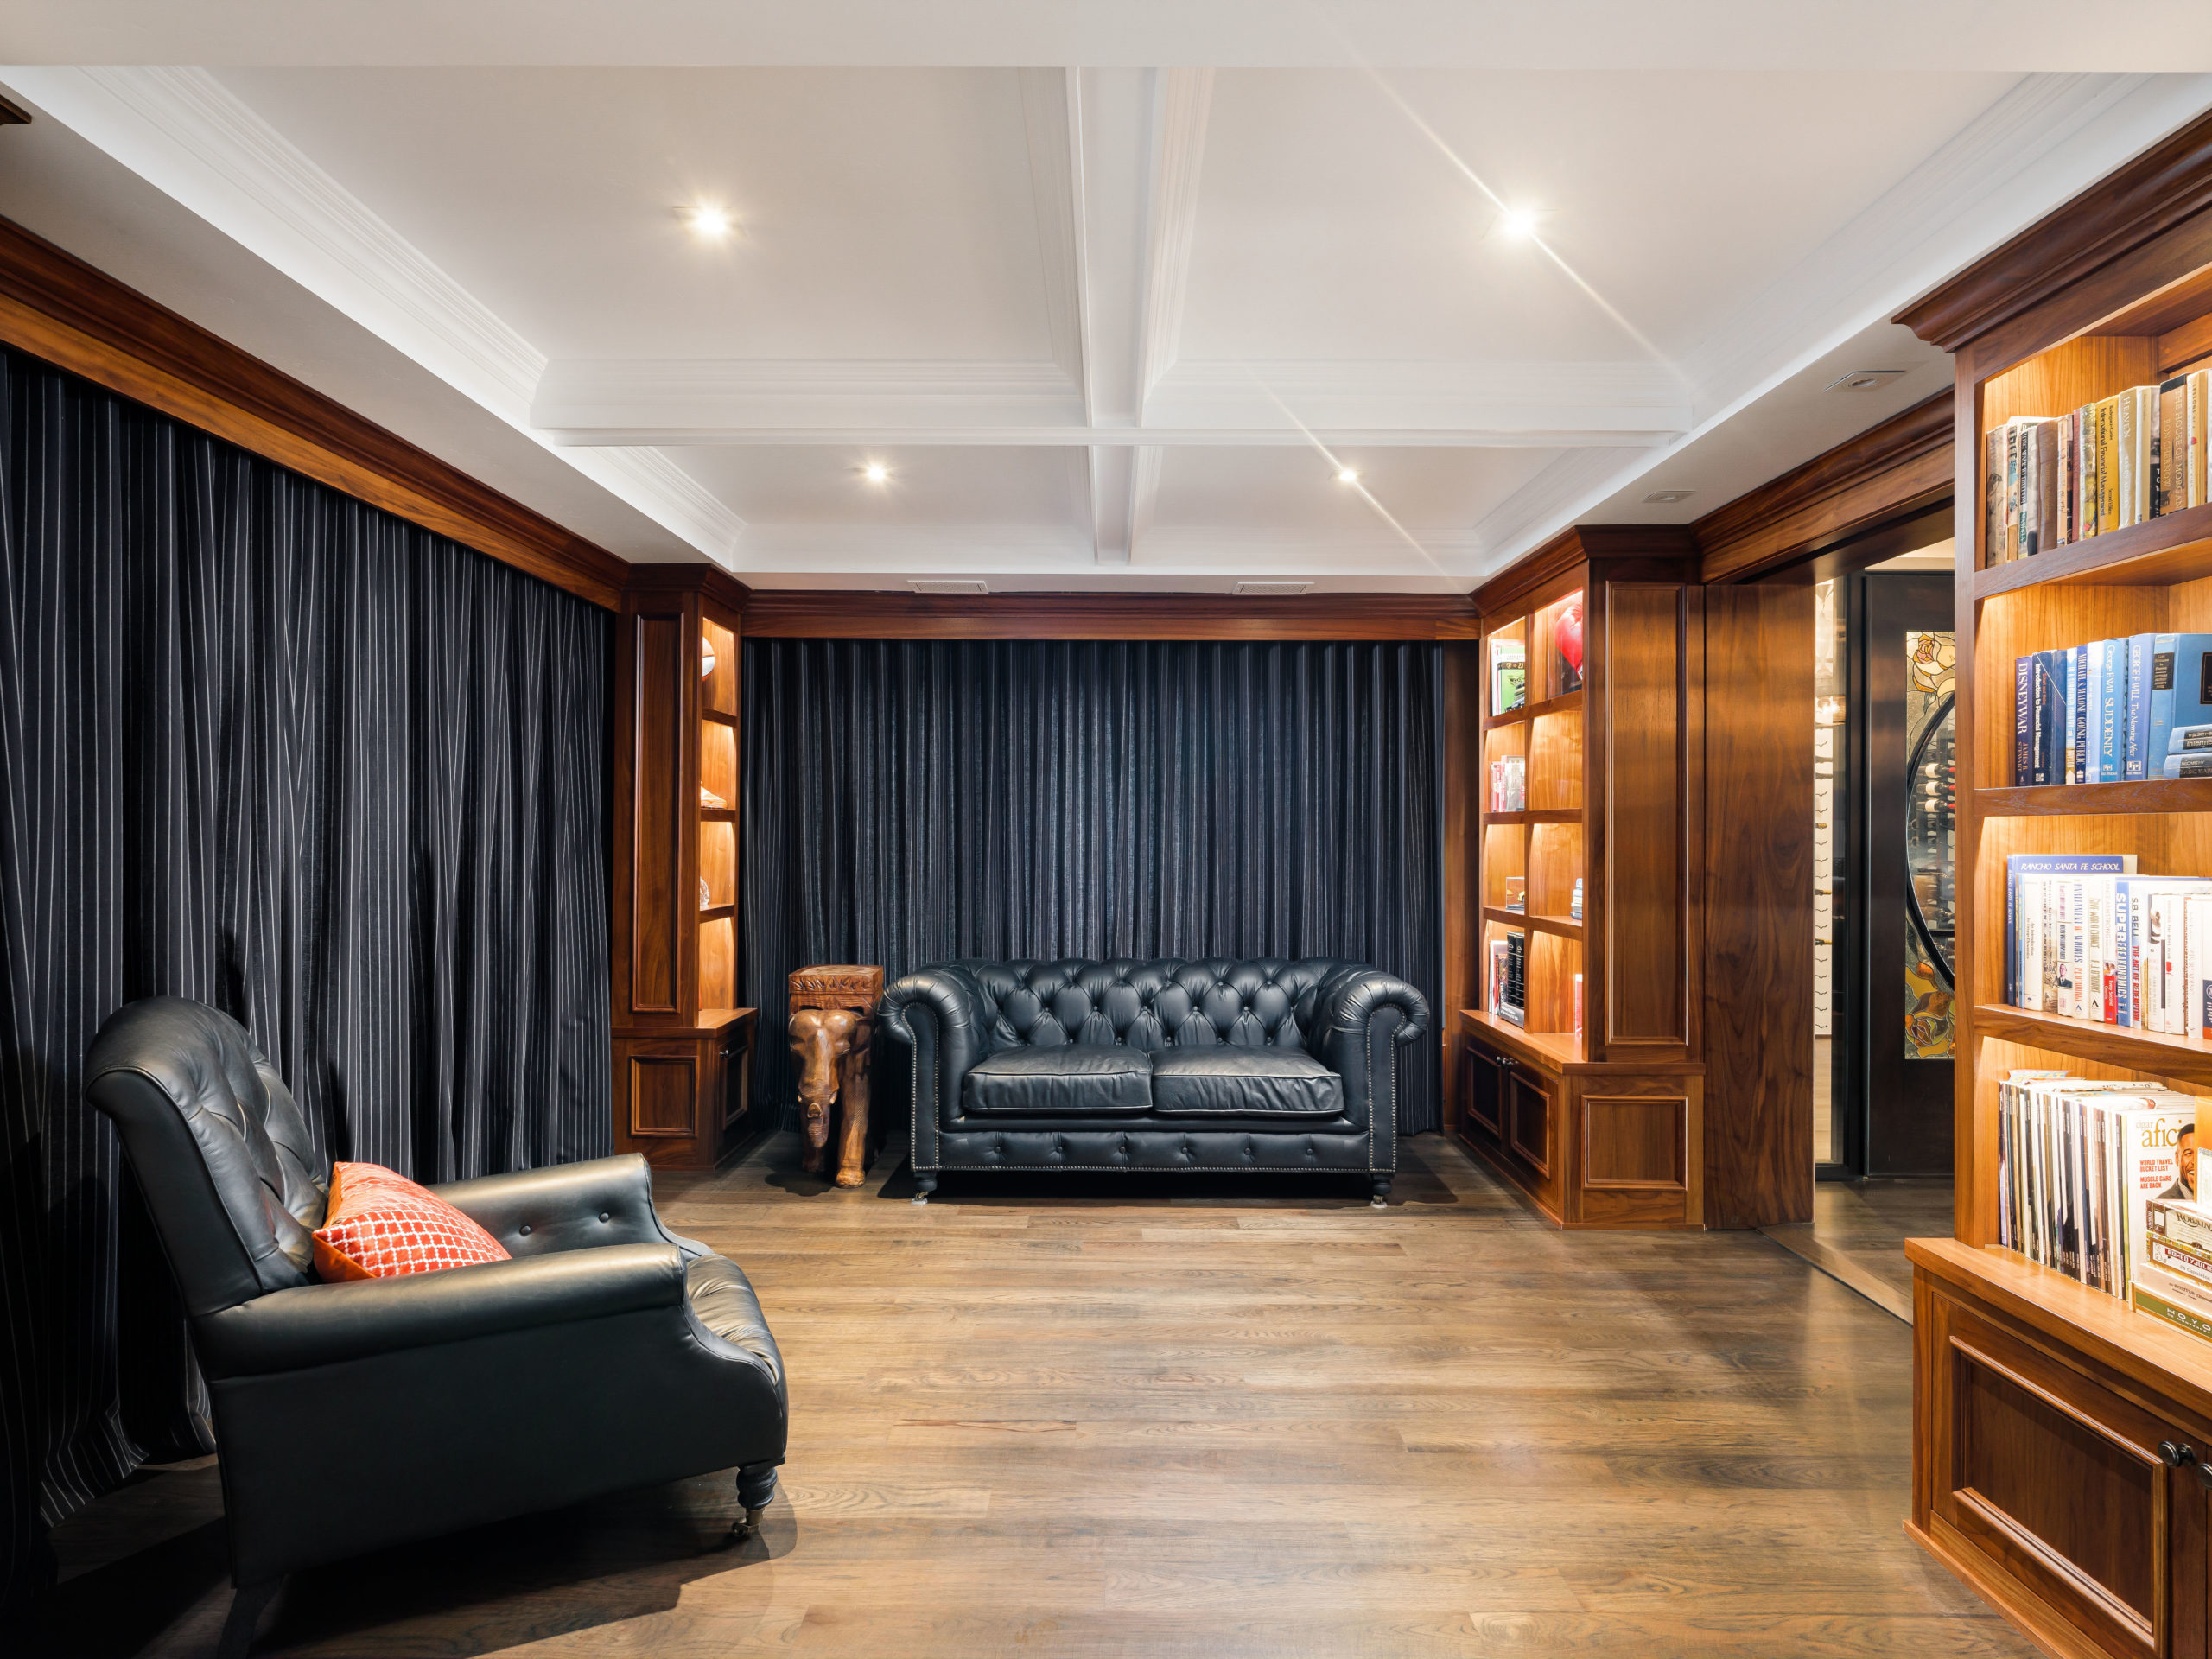 secret library room with black curtains